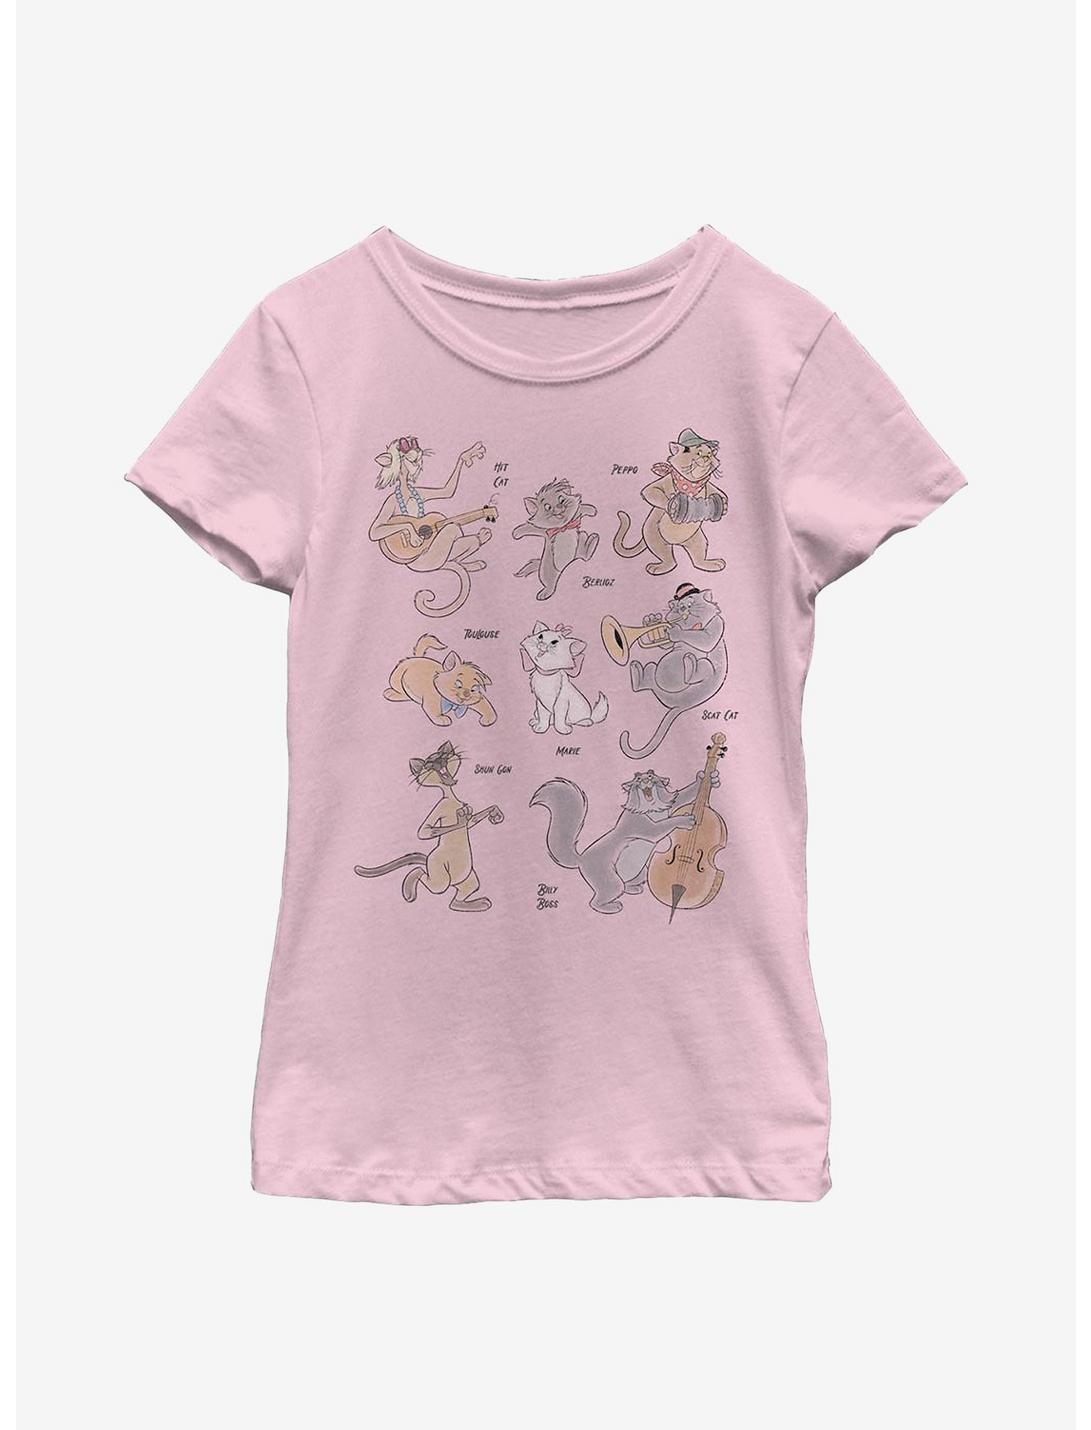 Disney The Aristocats Group Youth Girls T-Shirt, PINK, hi-res